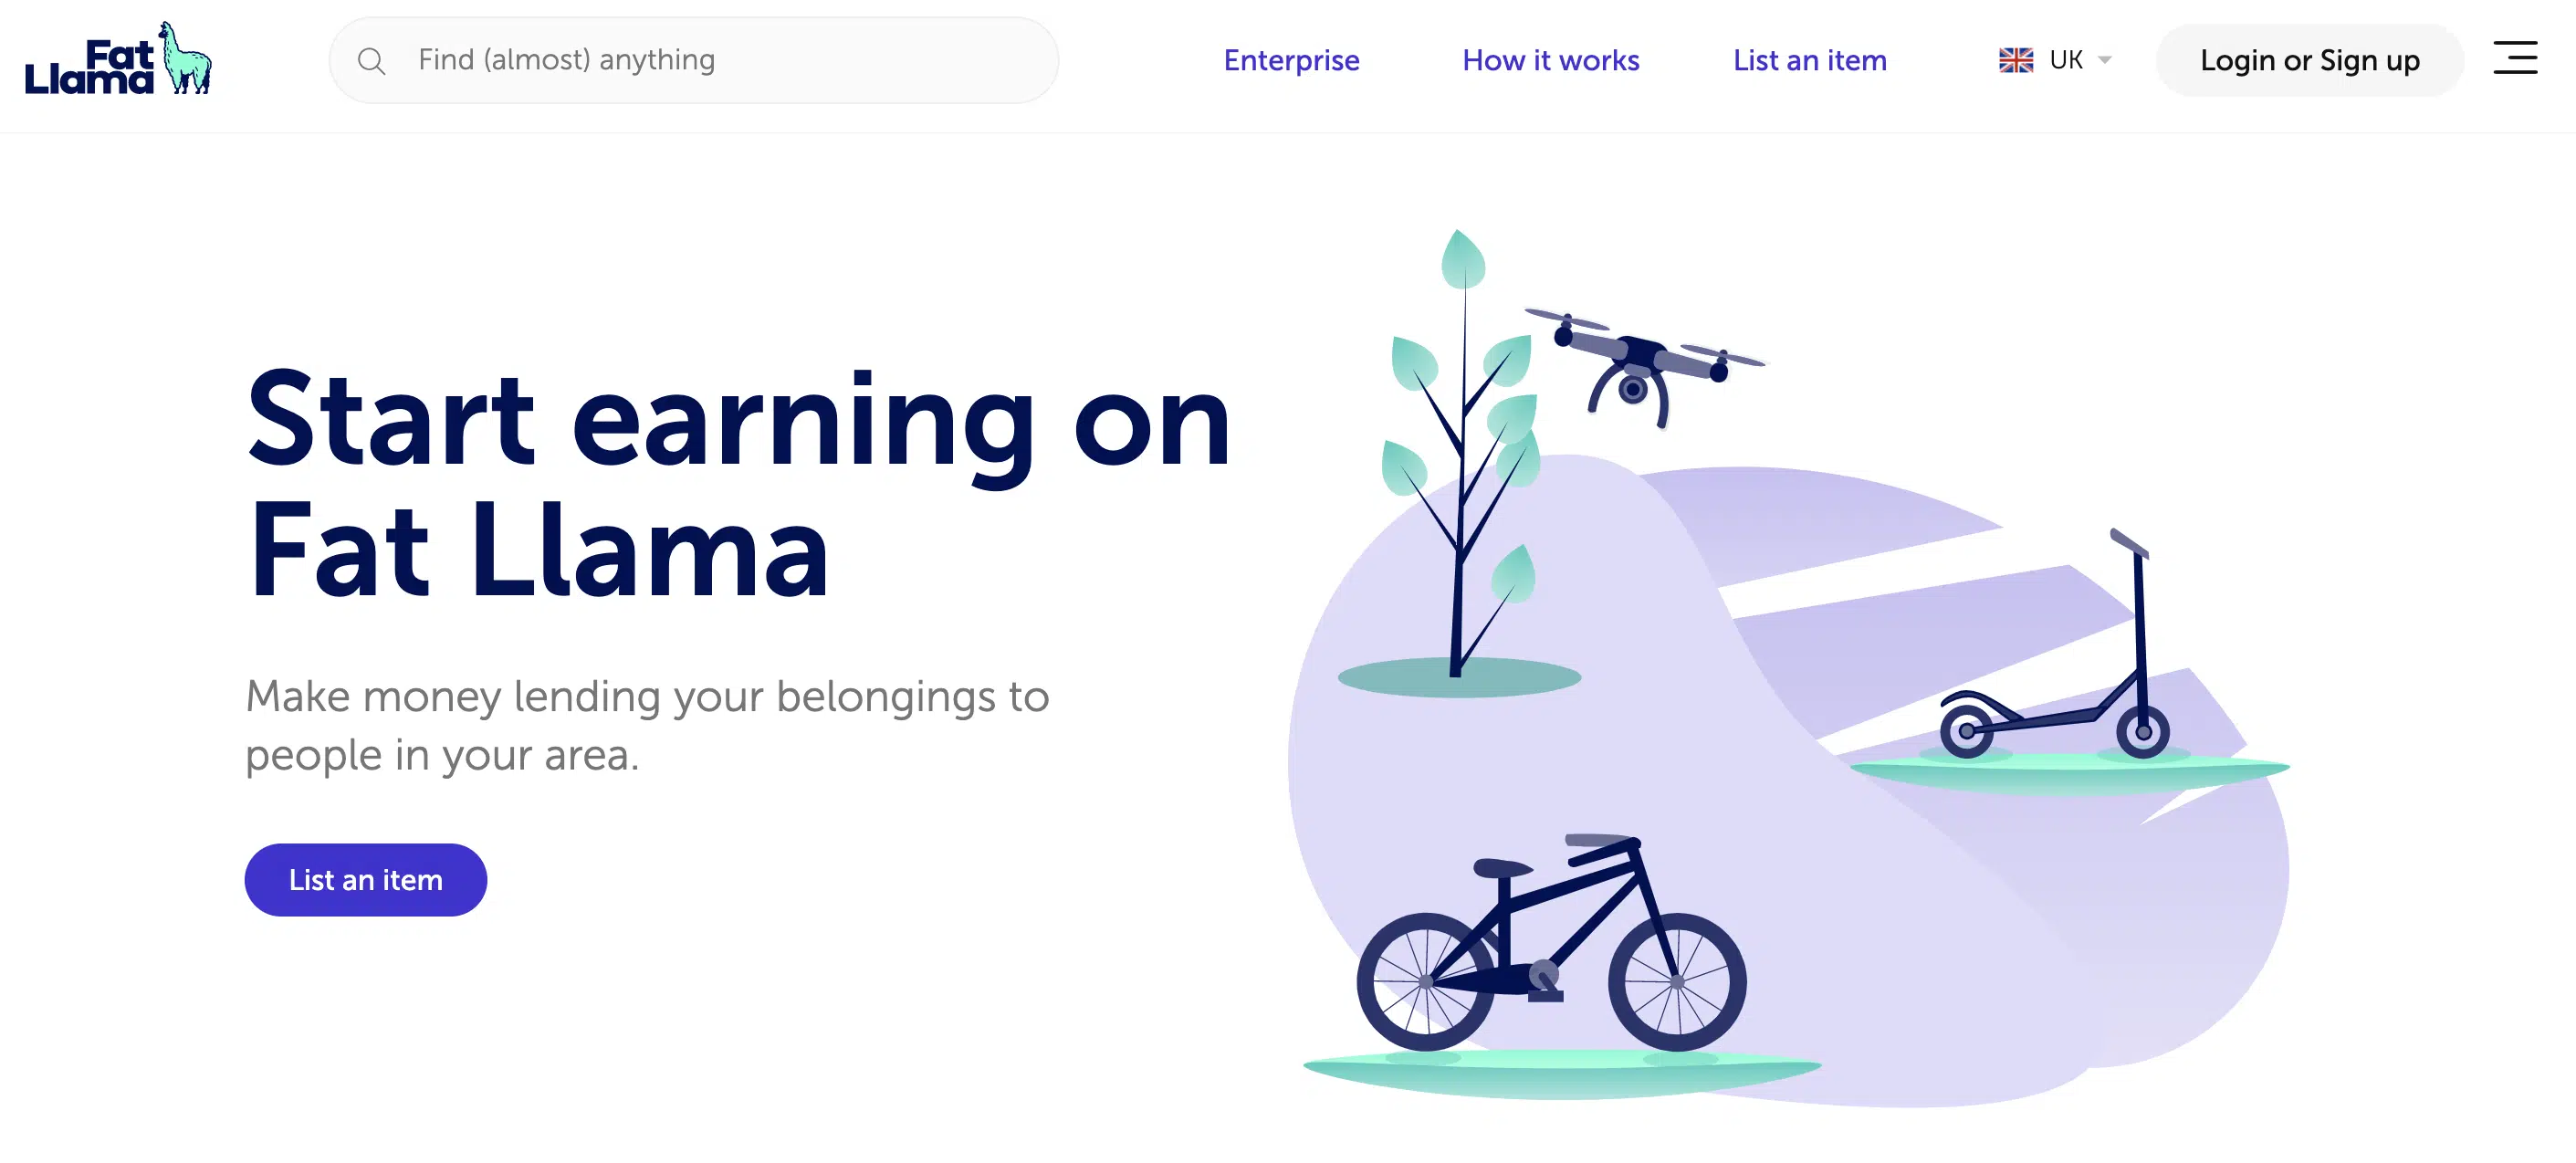 A screenshot from the website Fat Llama, where you can make extra money renting out objects such as bikes, cameras, drones and more.